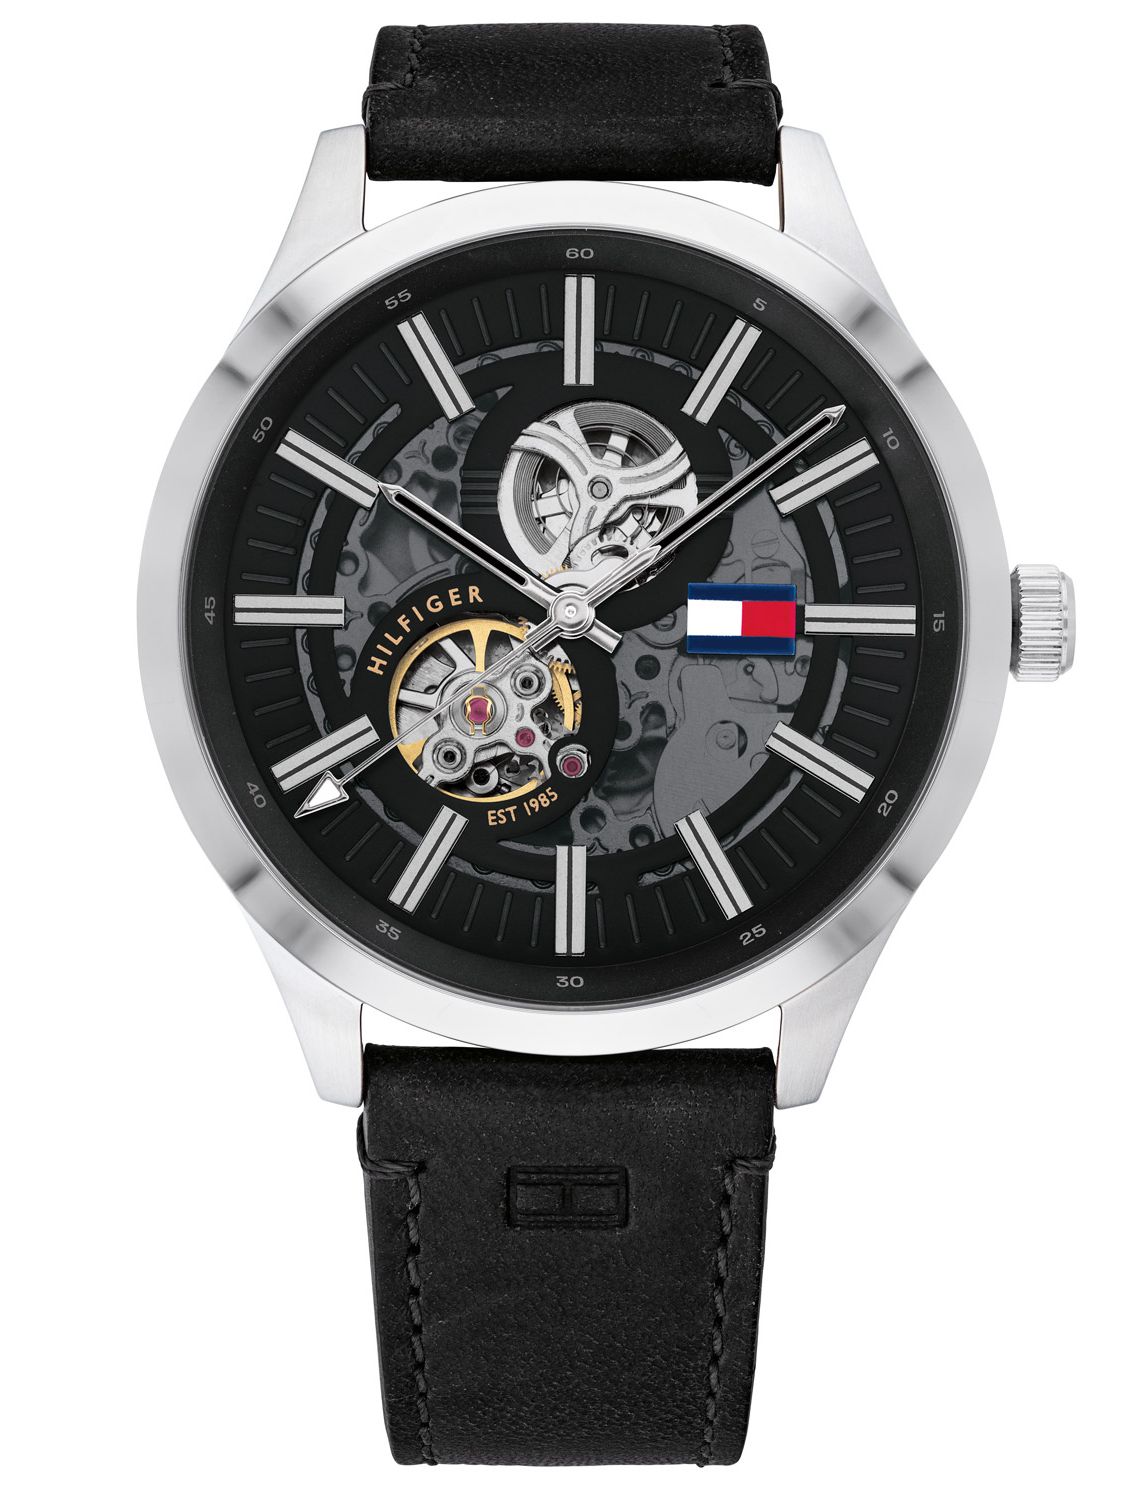 tommy hilfiger mechanical watches